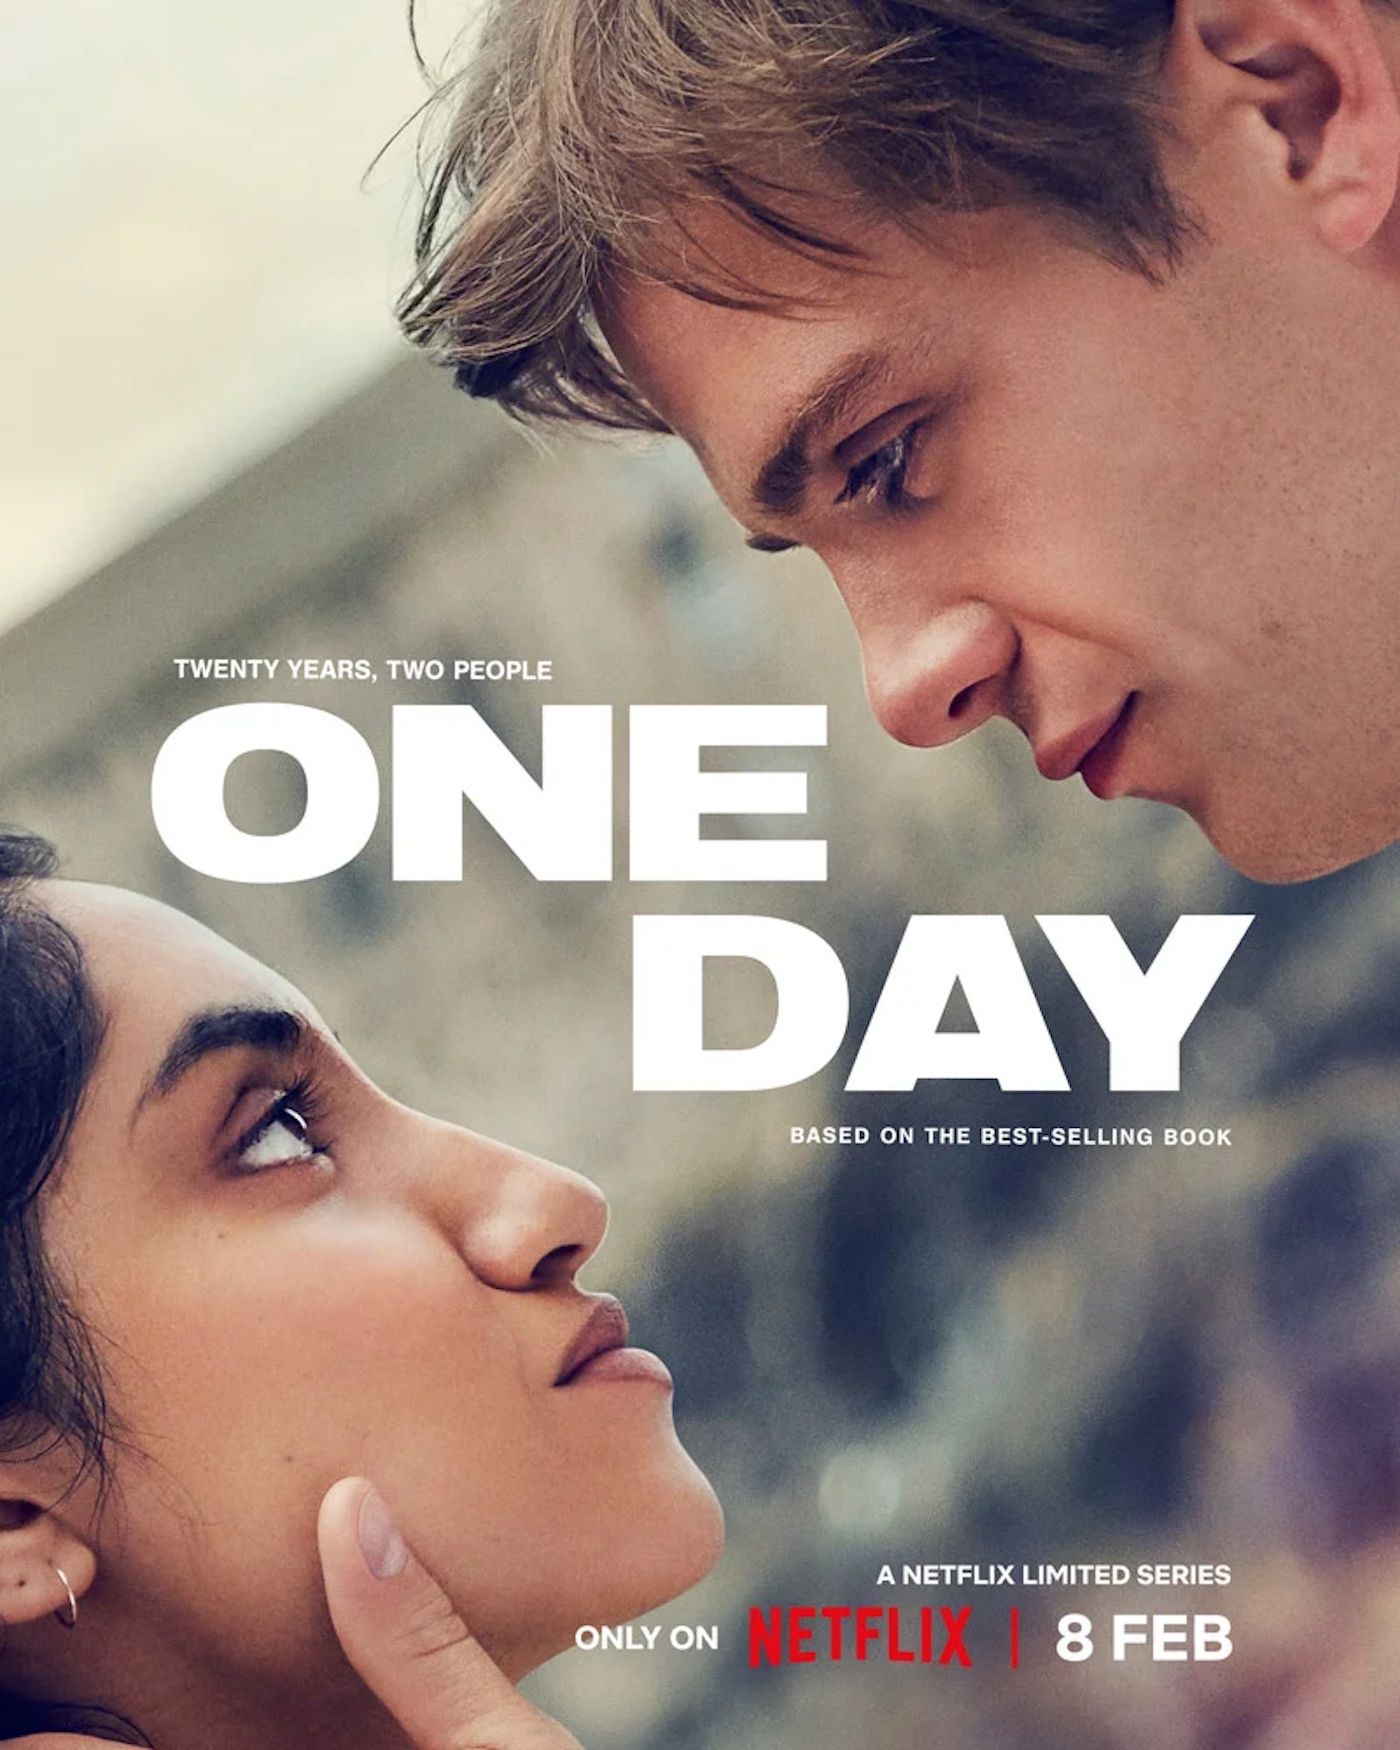 This Major Change Makes Netflix’s ‘One Day’ Better Than the Movie